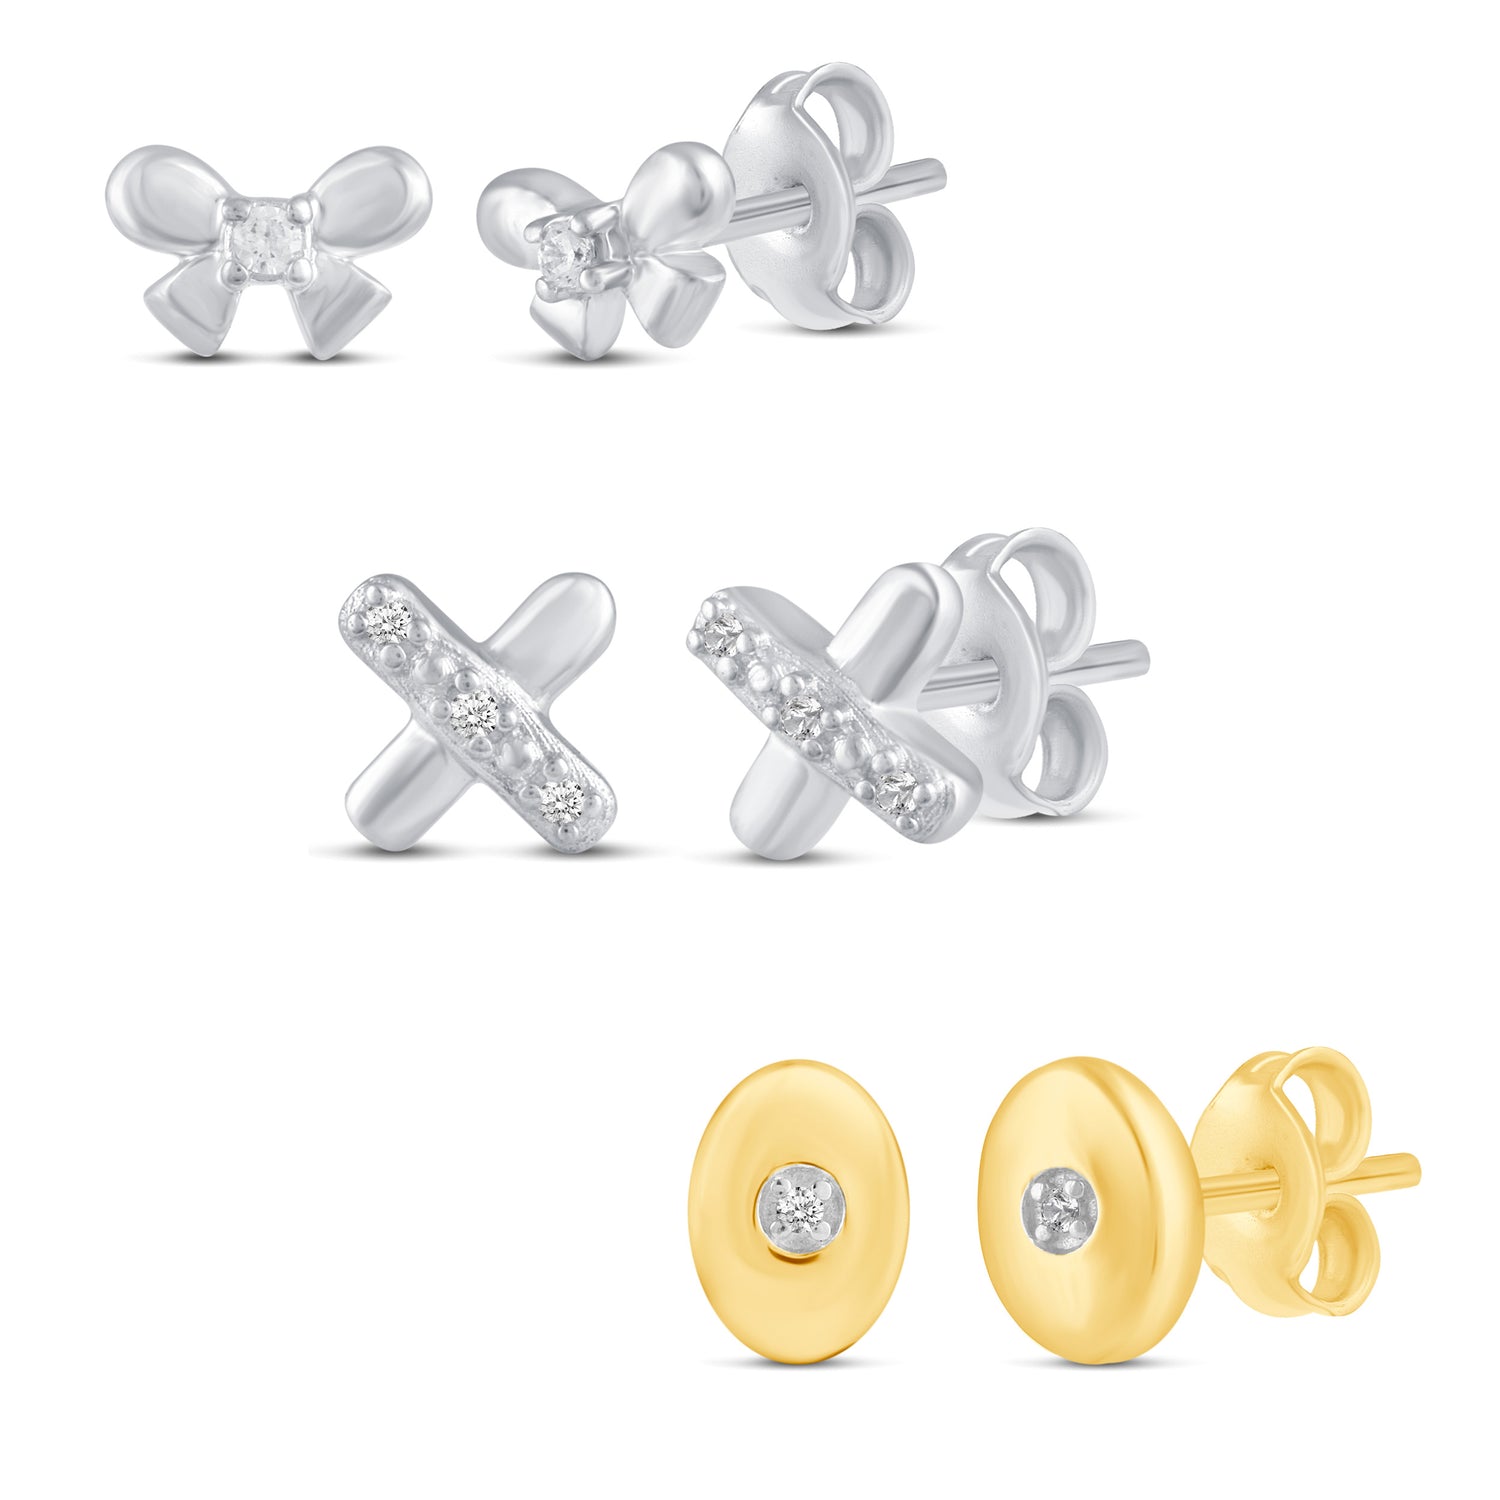 3 Pairs Set Ear Party 1/20 Cttw Natural Diamond Bow Tie X Disk Stud Earrings in 925 Sterling Silver